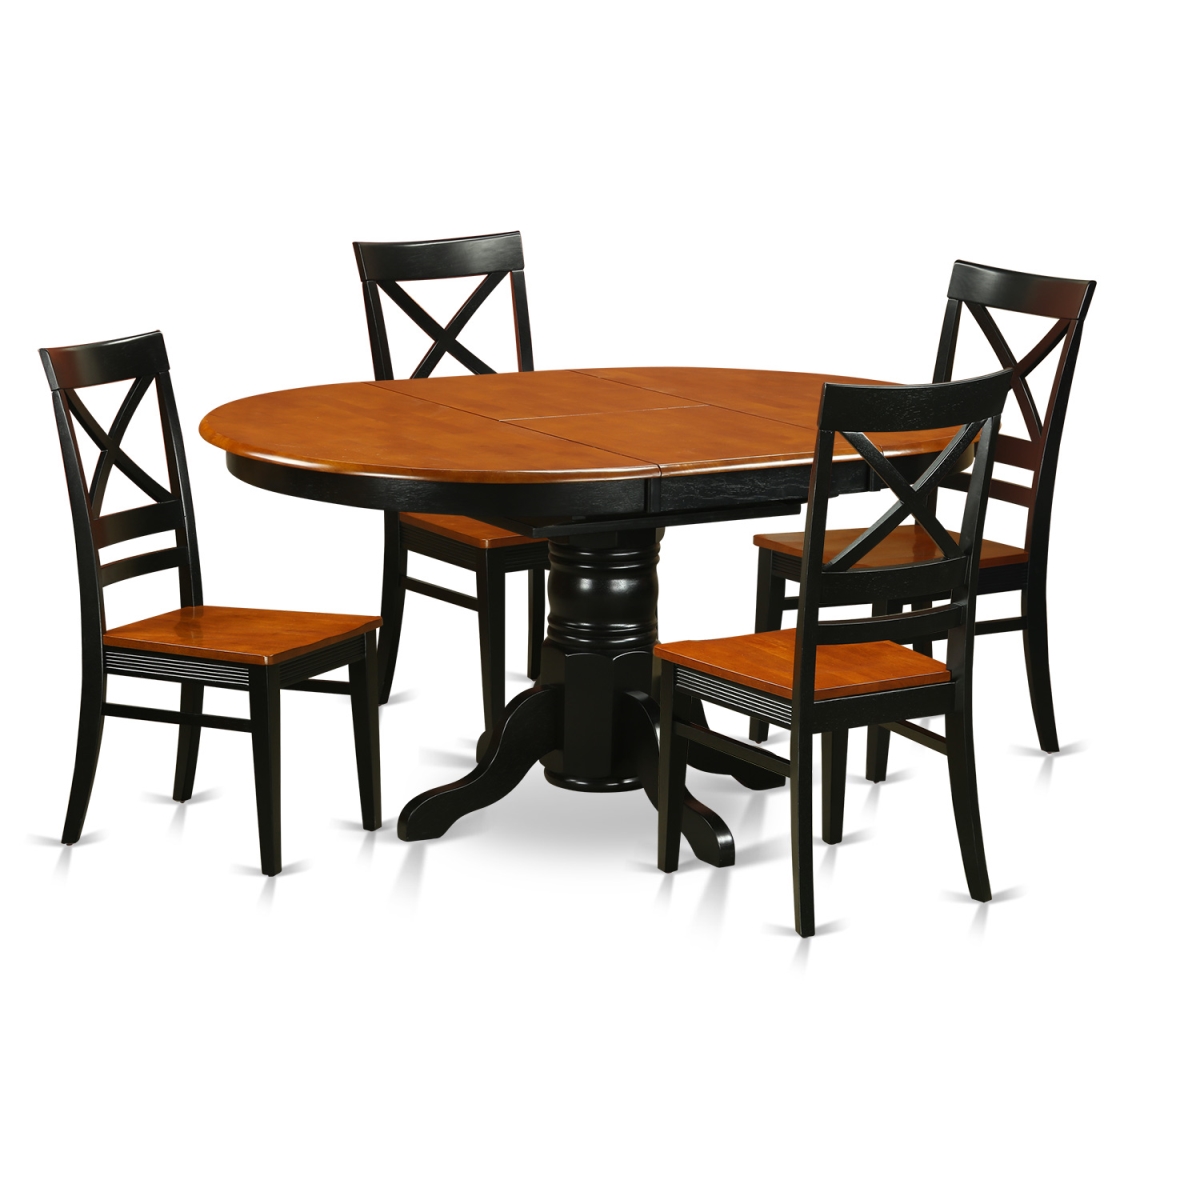 Picture of East West Furniture AVQU5-BCH-W Dining Set with 4 Wood Chairs, Black & Cherry - 5 Piece